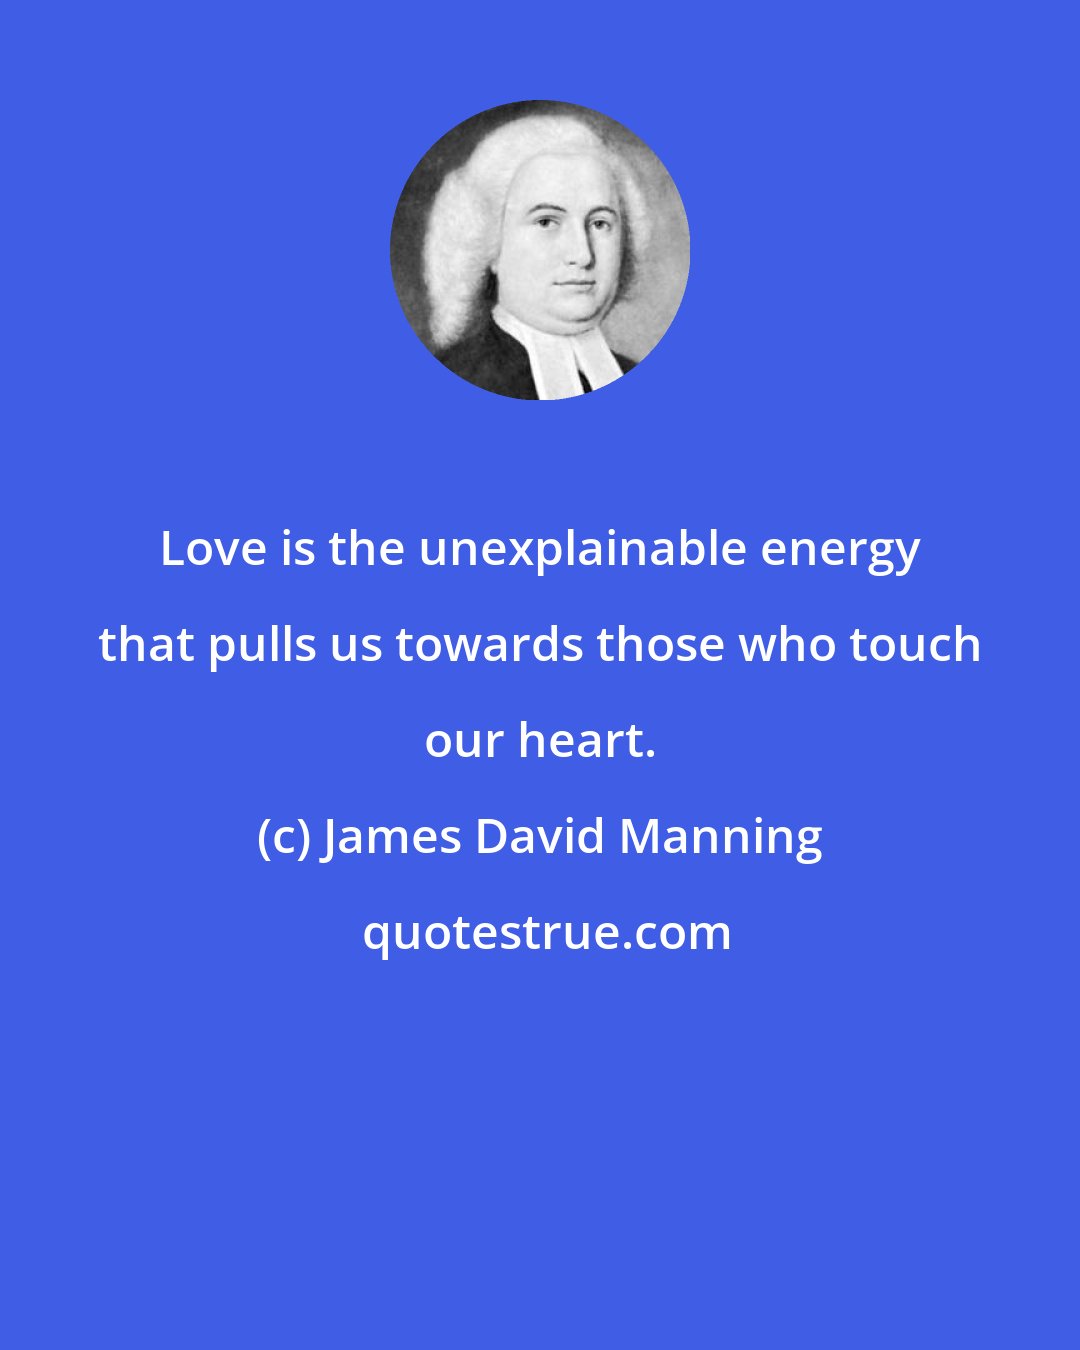 James David Manning: Love is the unexplainable energy that pulls us towards those who touch our heart.